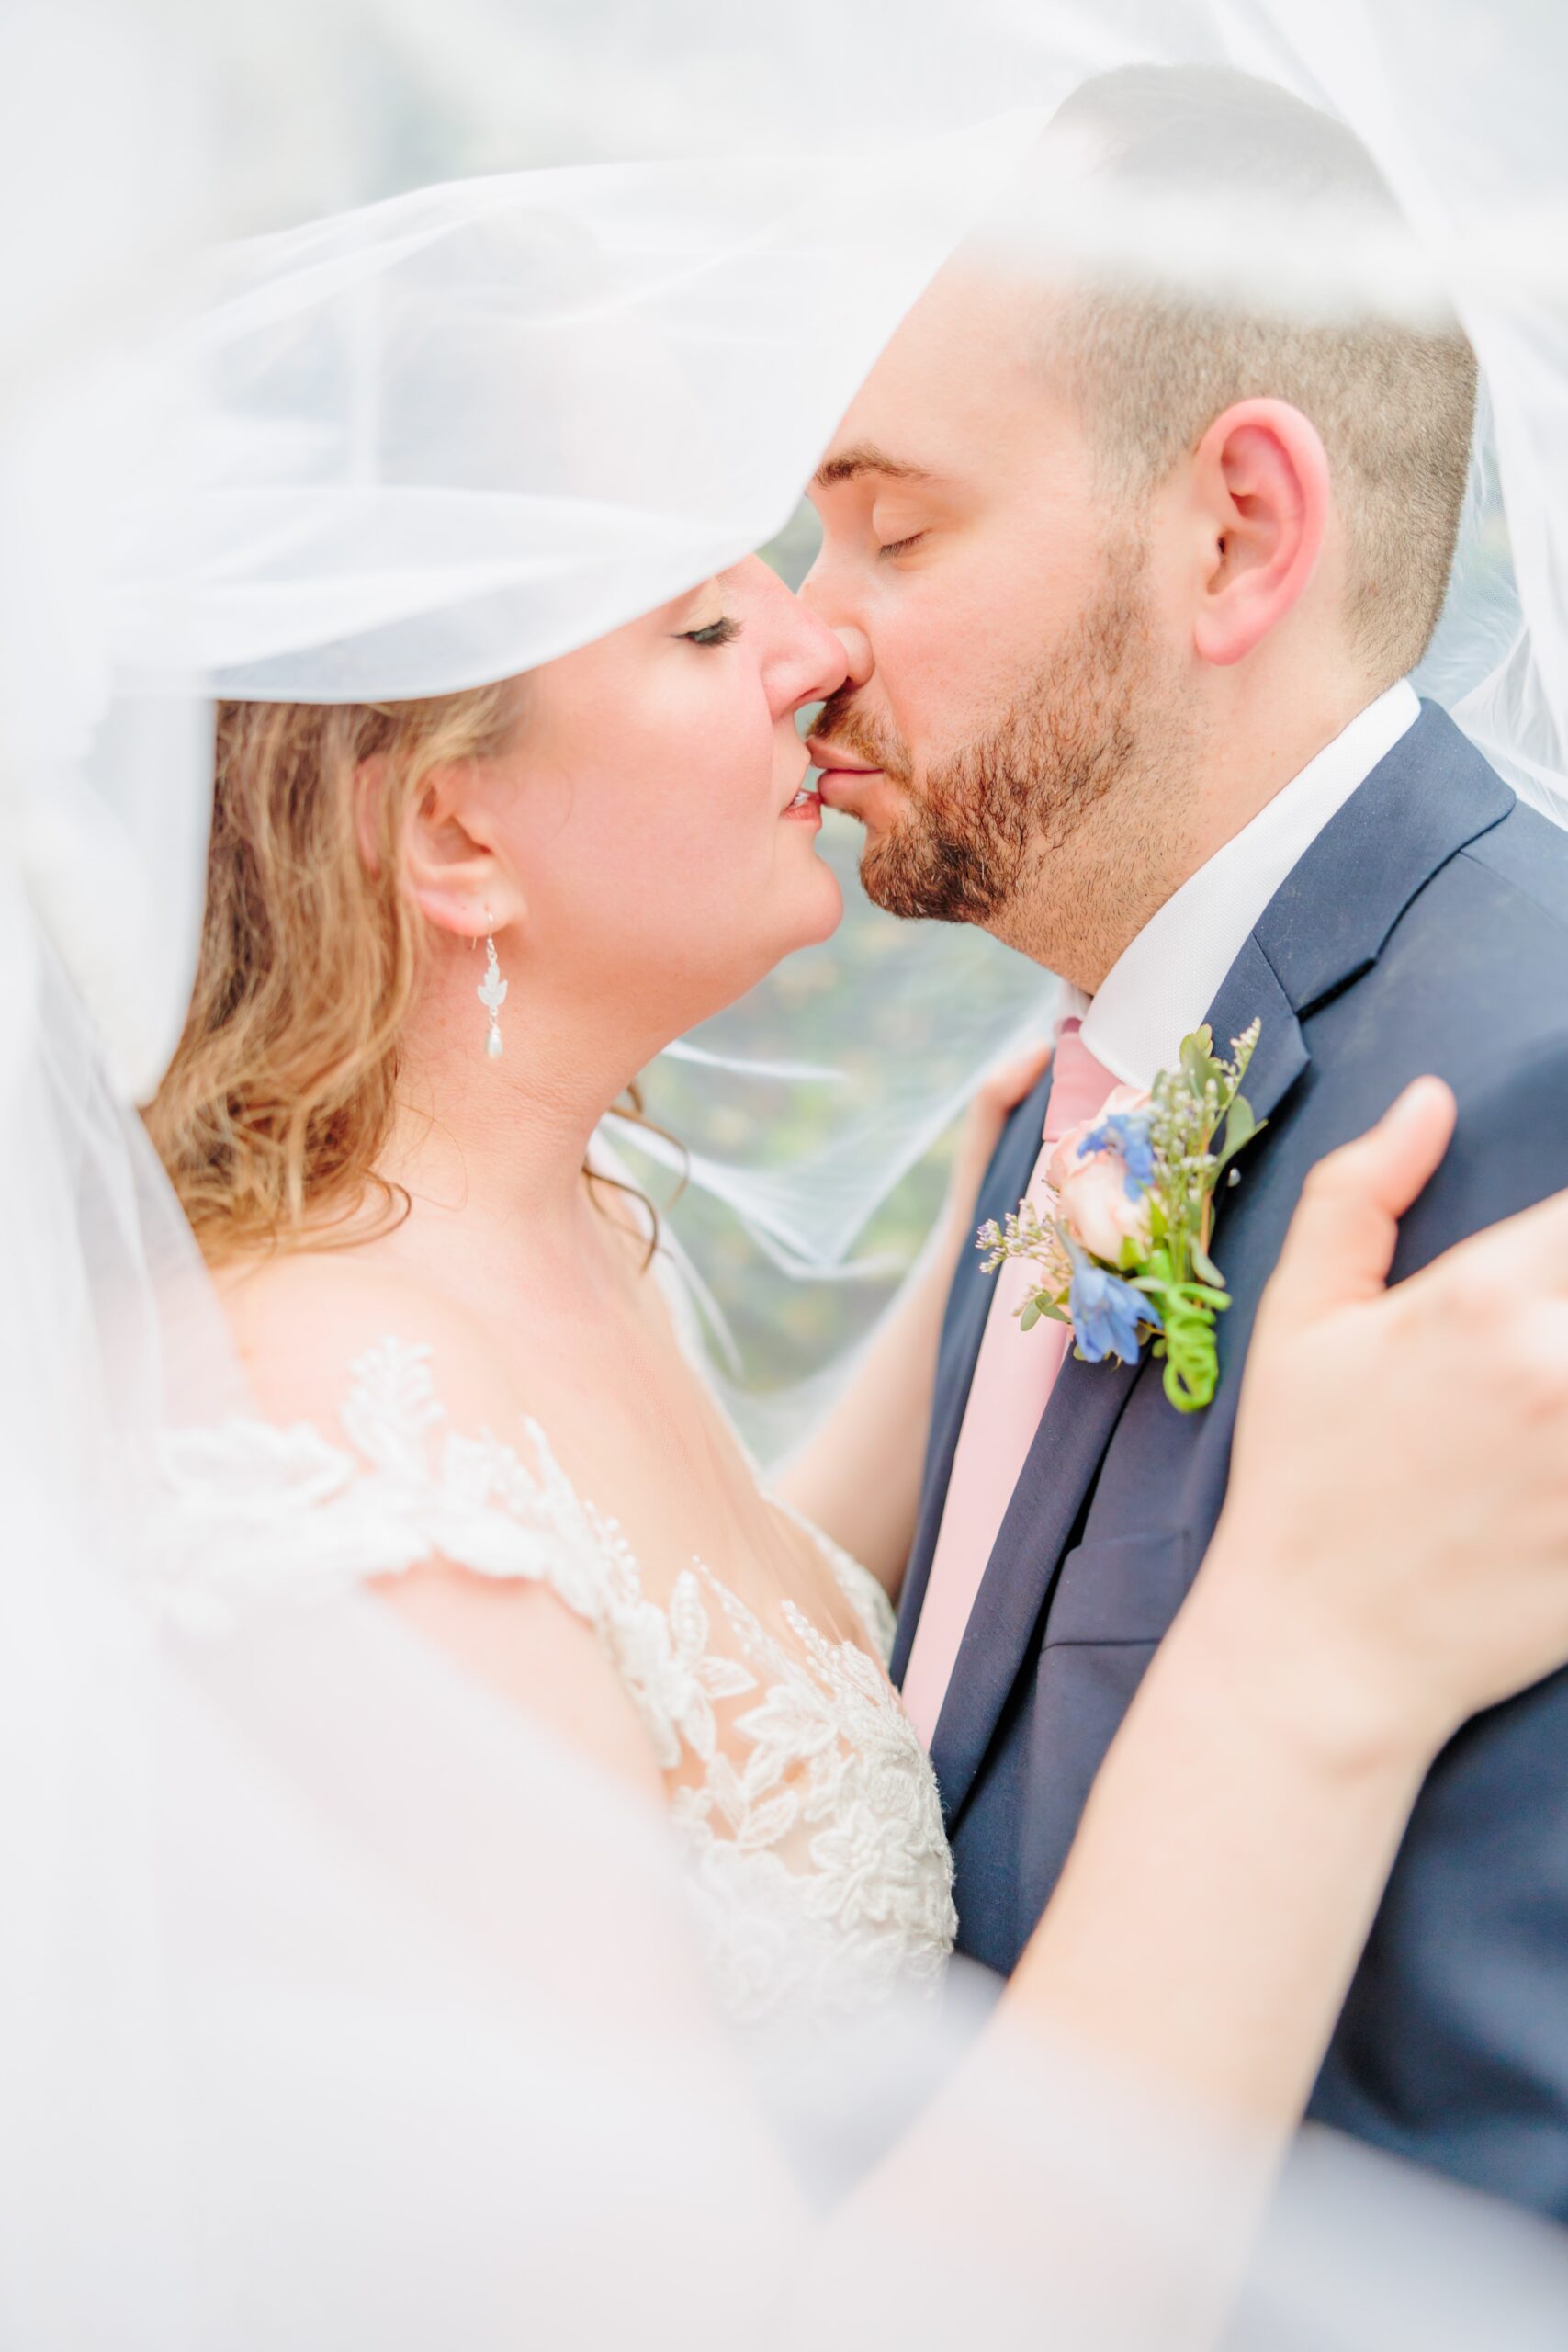 Emelia and Wakefield kiss under their veil after their Greensboro wedding.